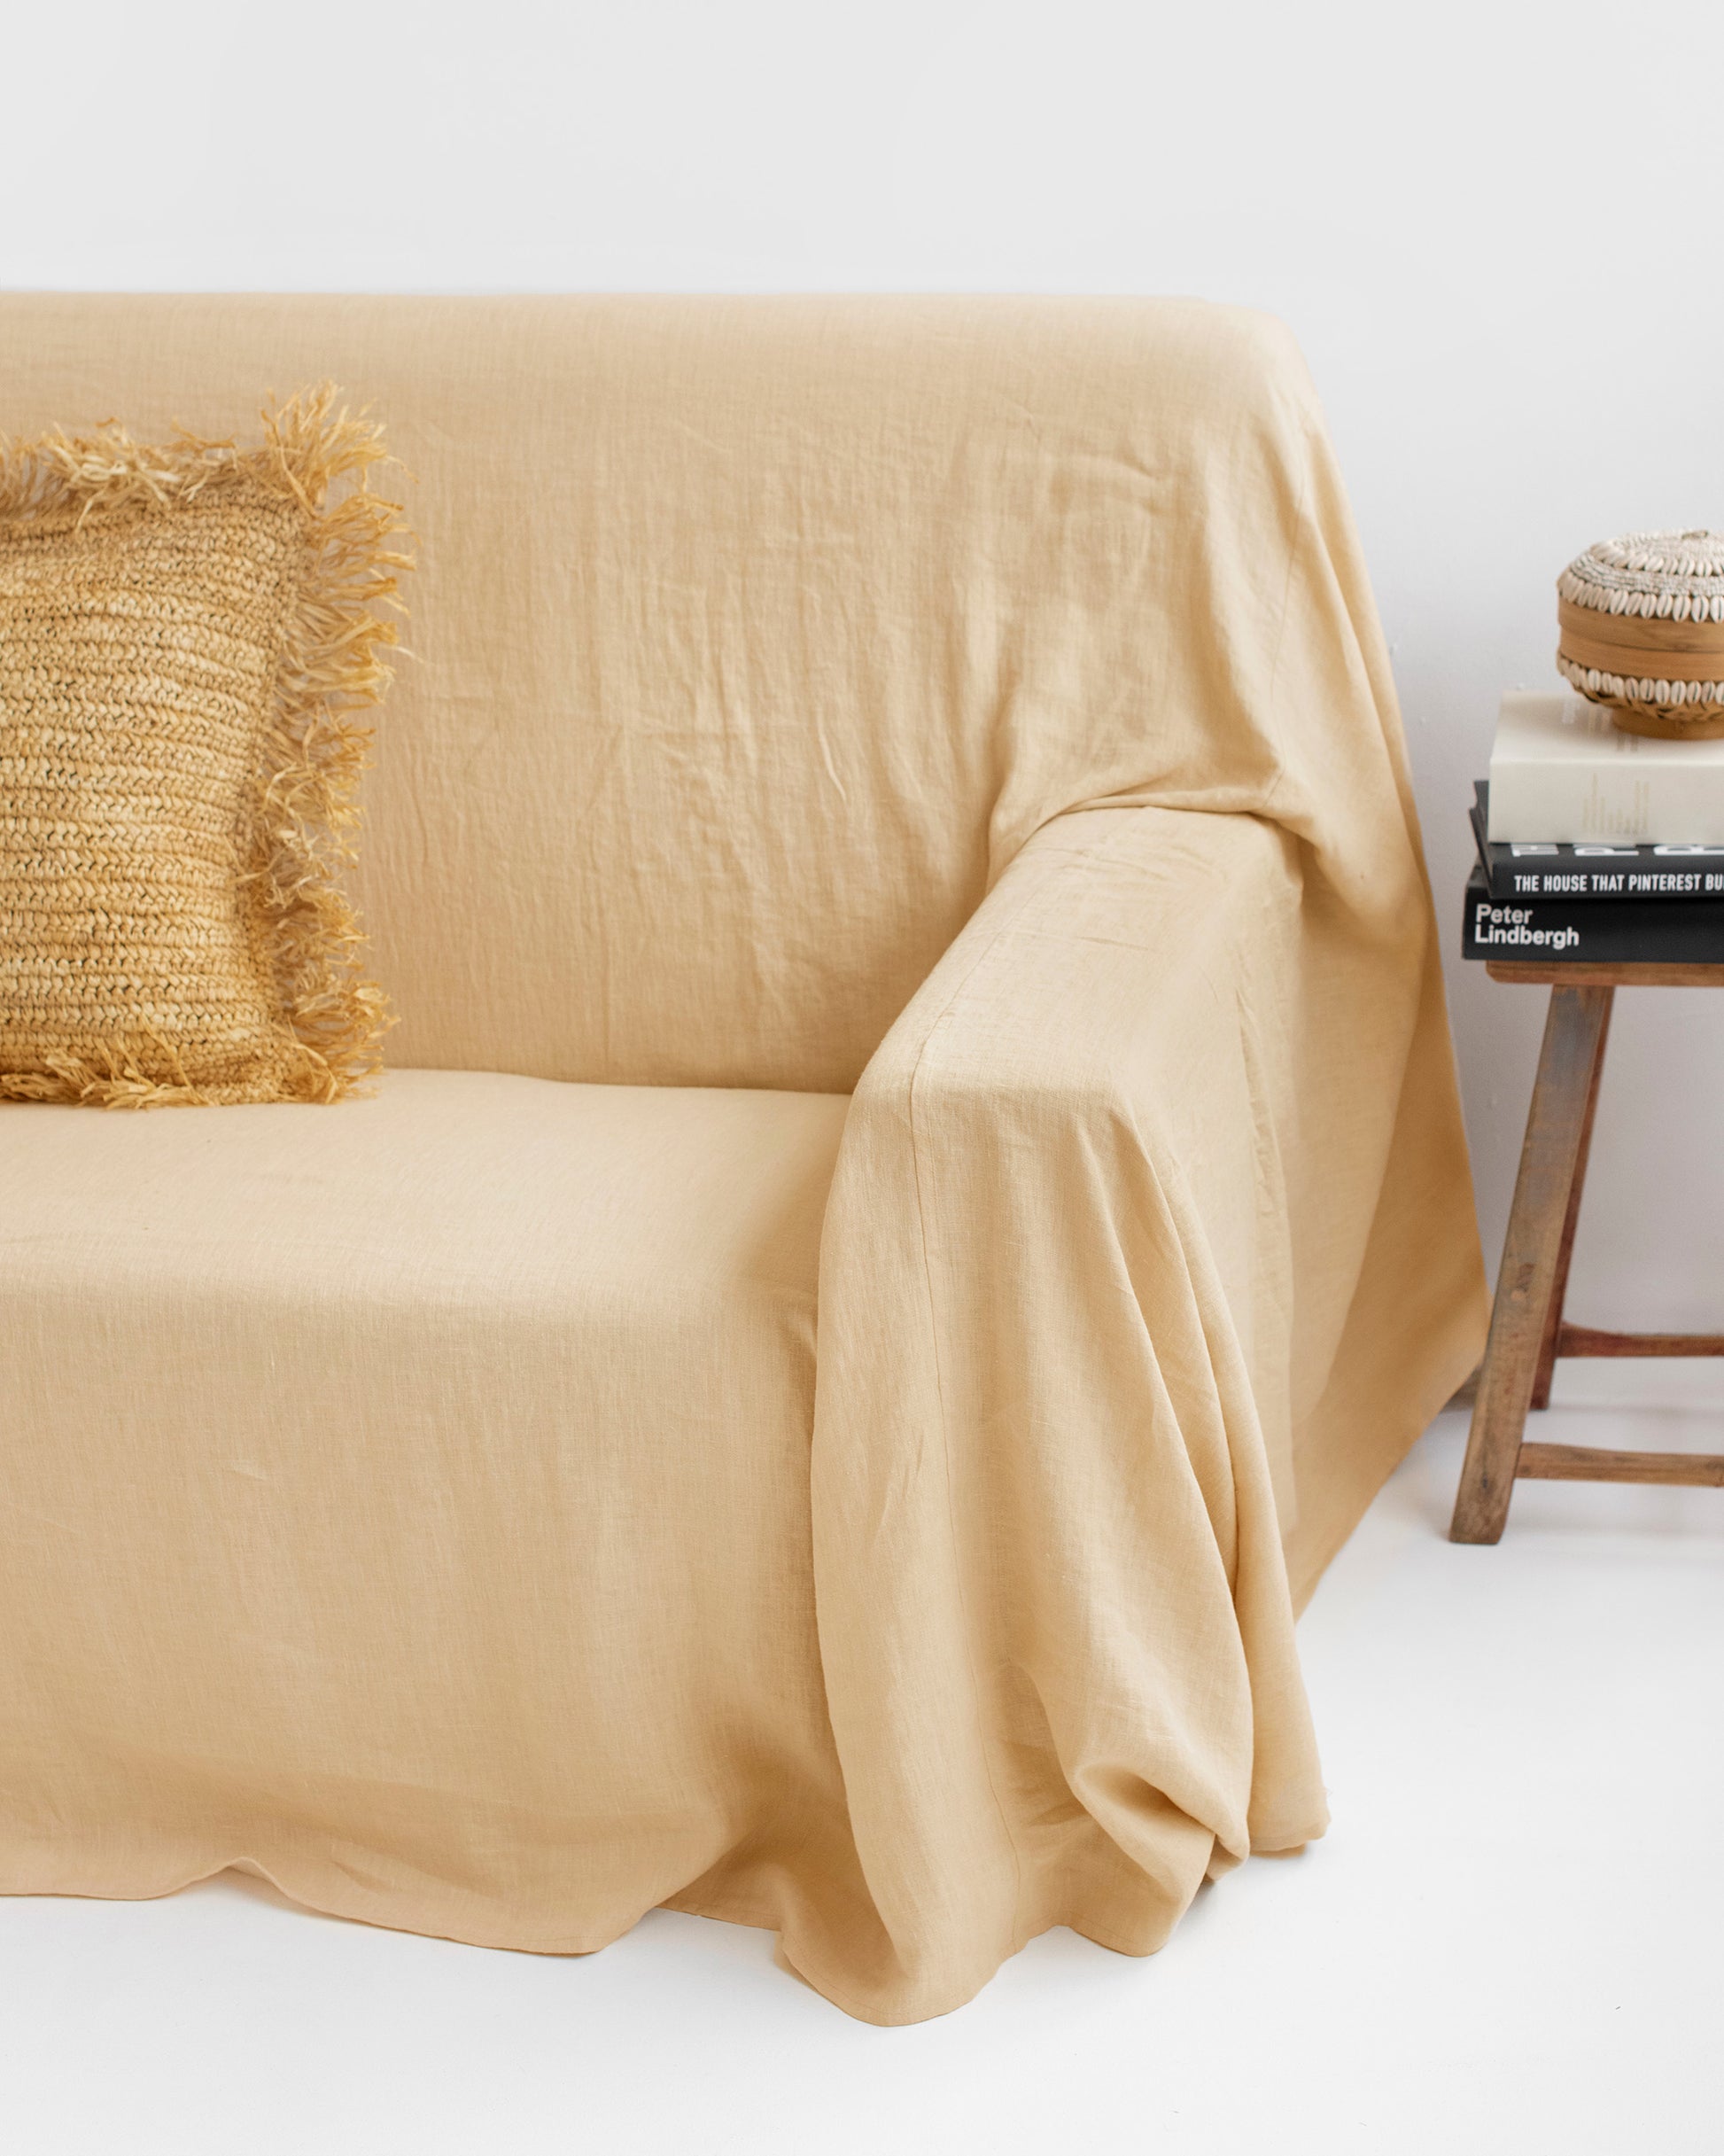 Linen couch cover in Sandy beige - MagicLinen